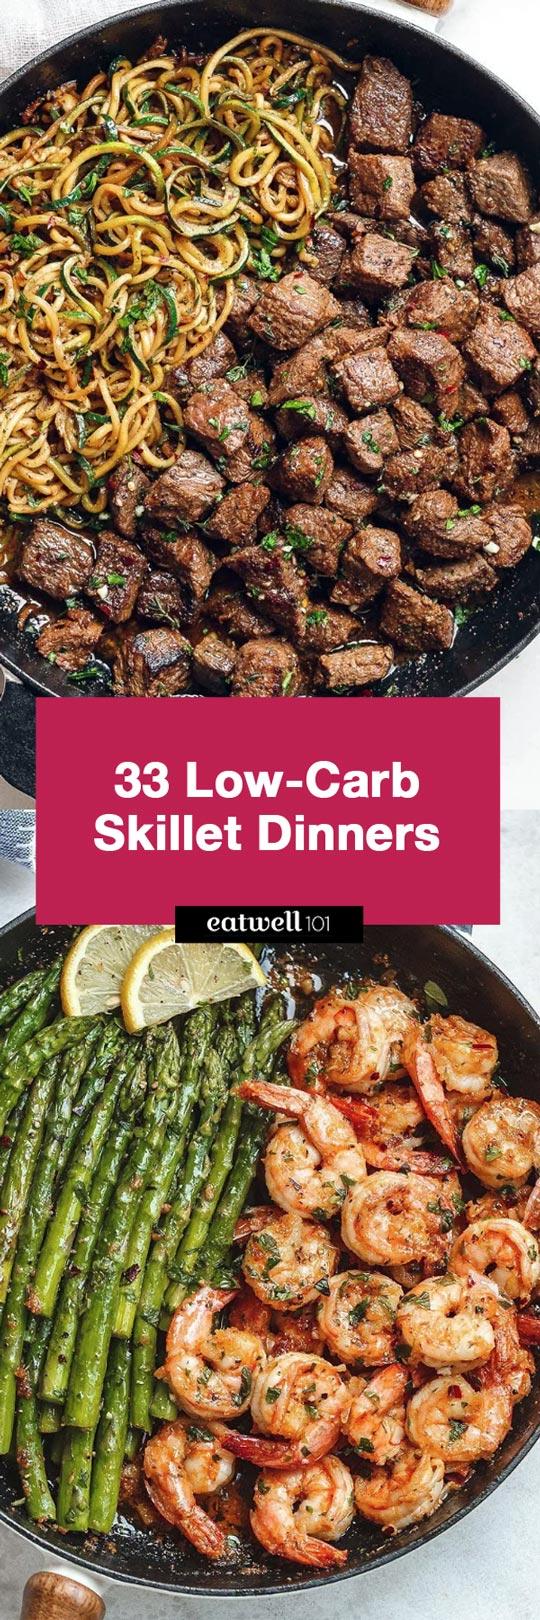 Low-Carb Skillet Dinner Recipes - These low-carb skillet dinners recipes are filling, quick, and so easy!